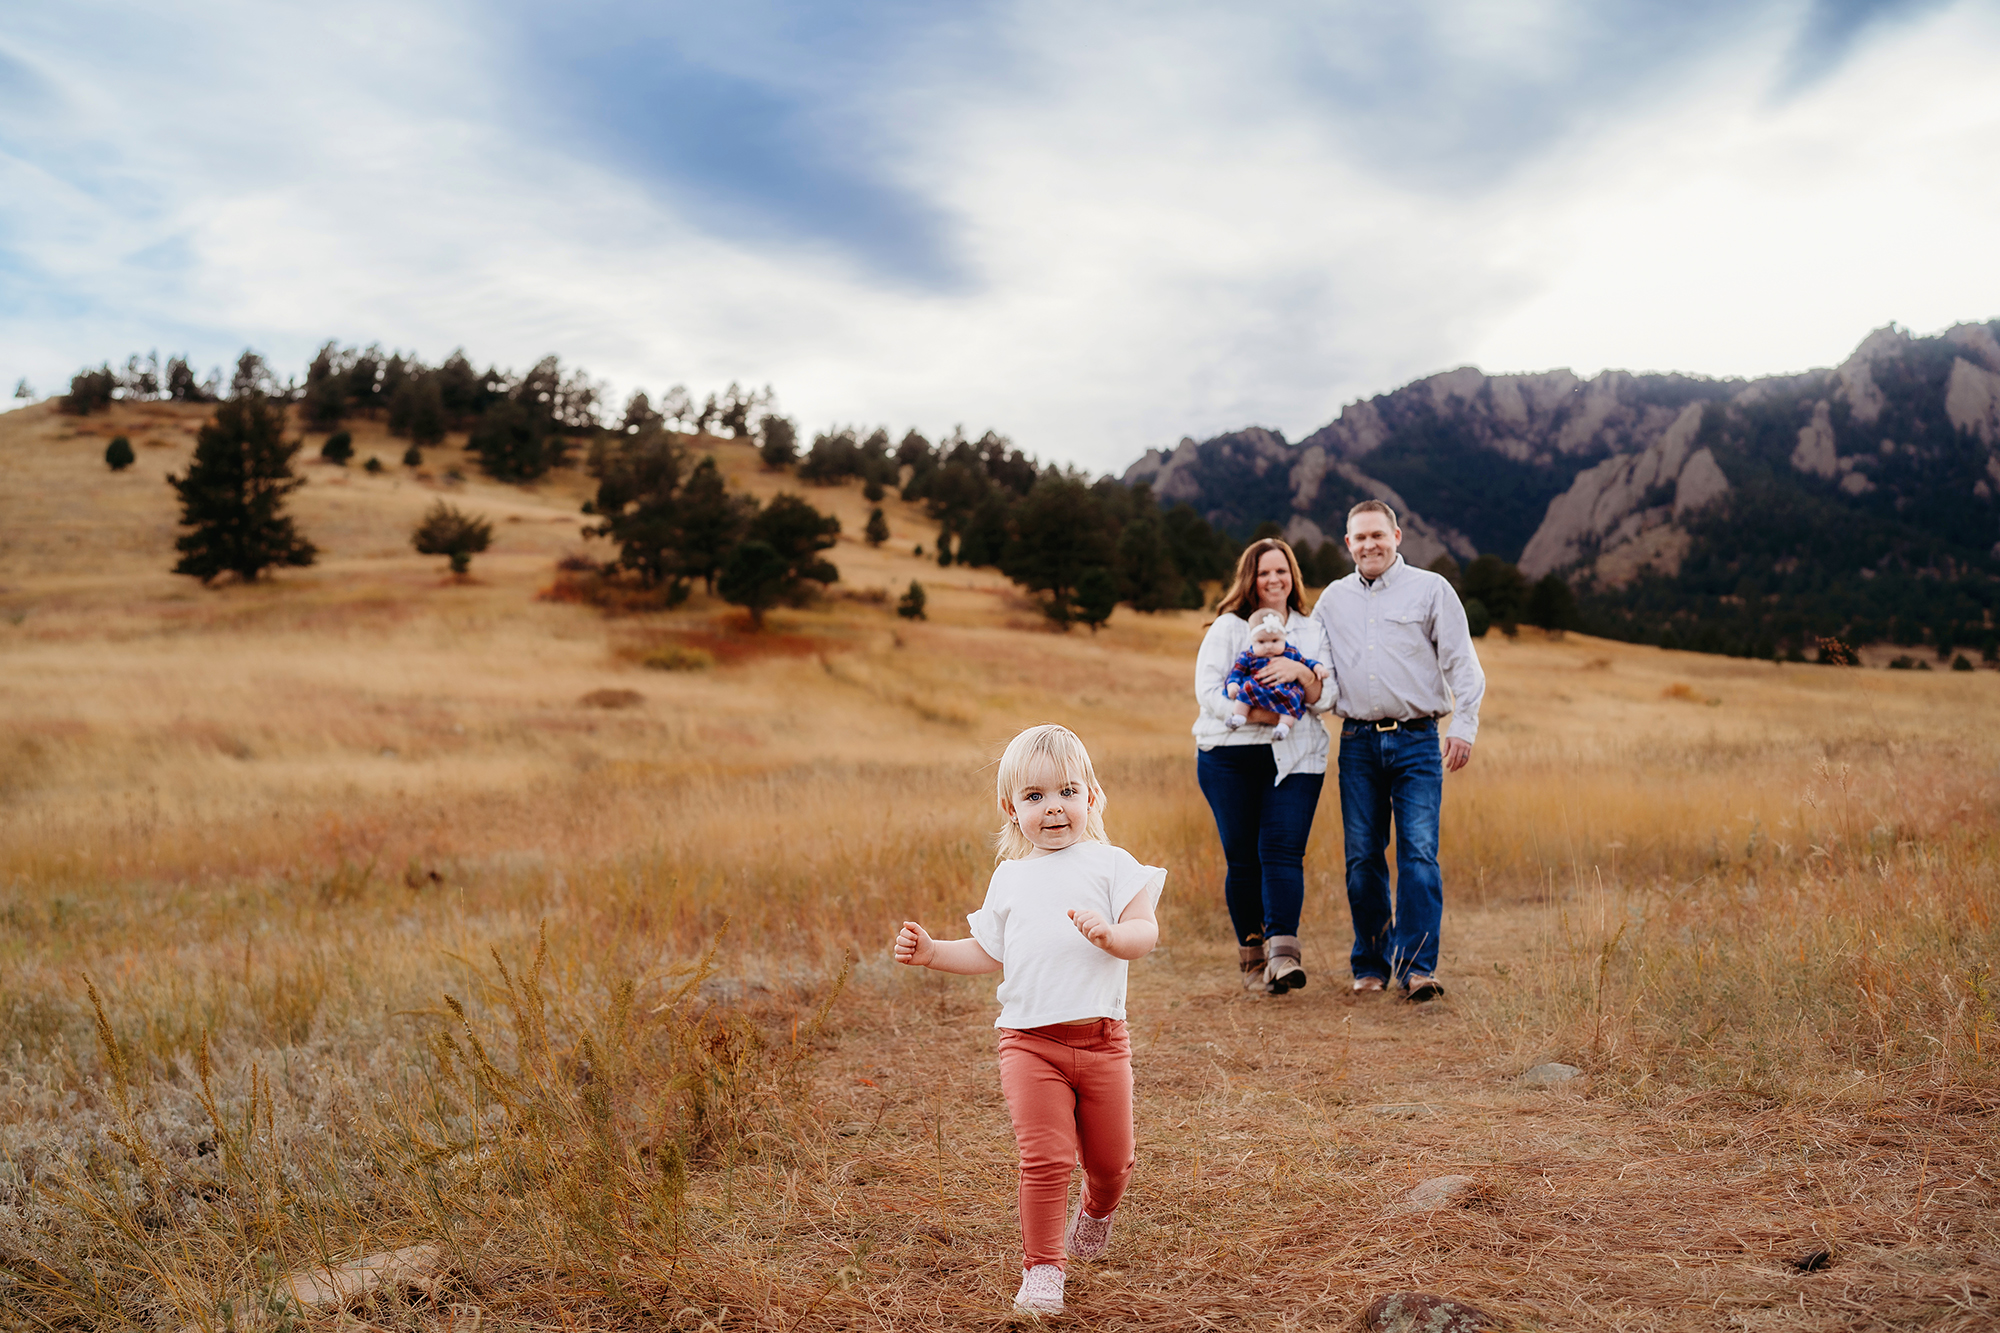 parents and a baby standing together in an open field in the fall with mountains and a forest behind them, while toddler runs up the trail ahead of them